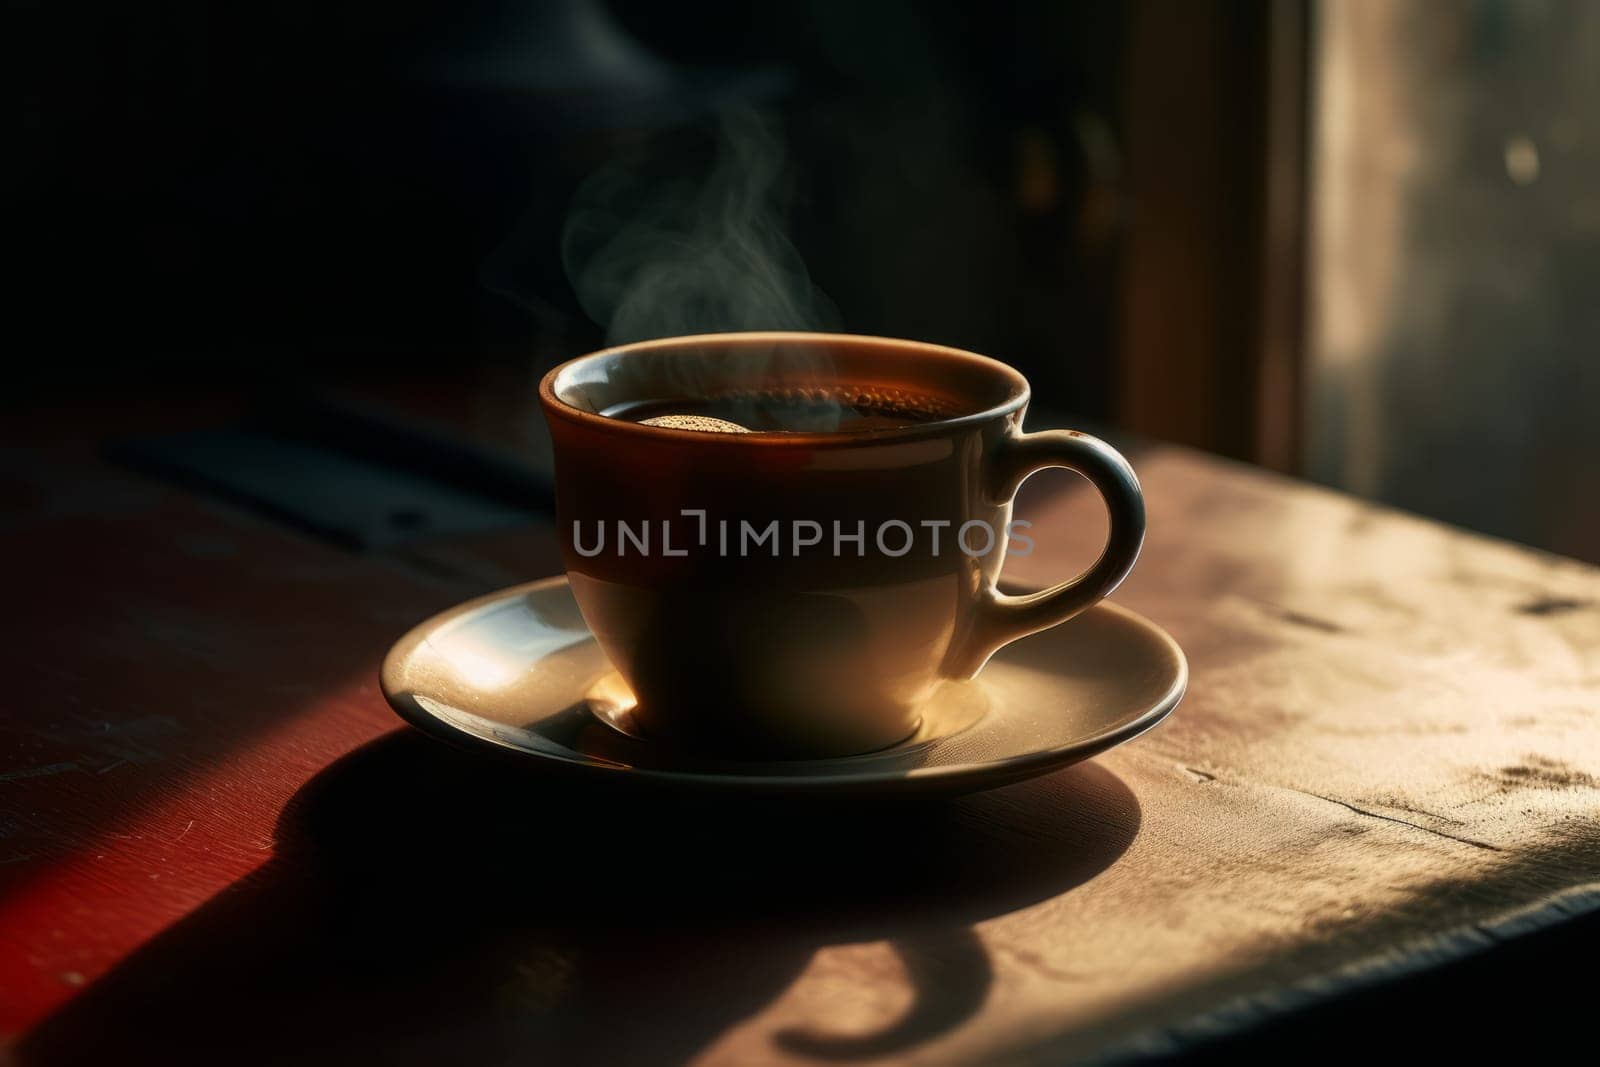 A cup of coffee on the table with steam coming out of the cup.